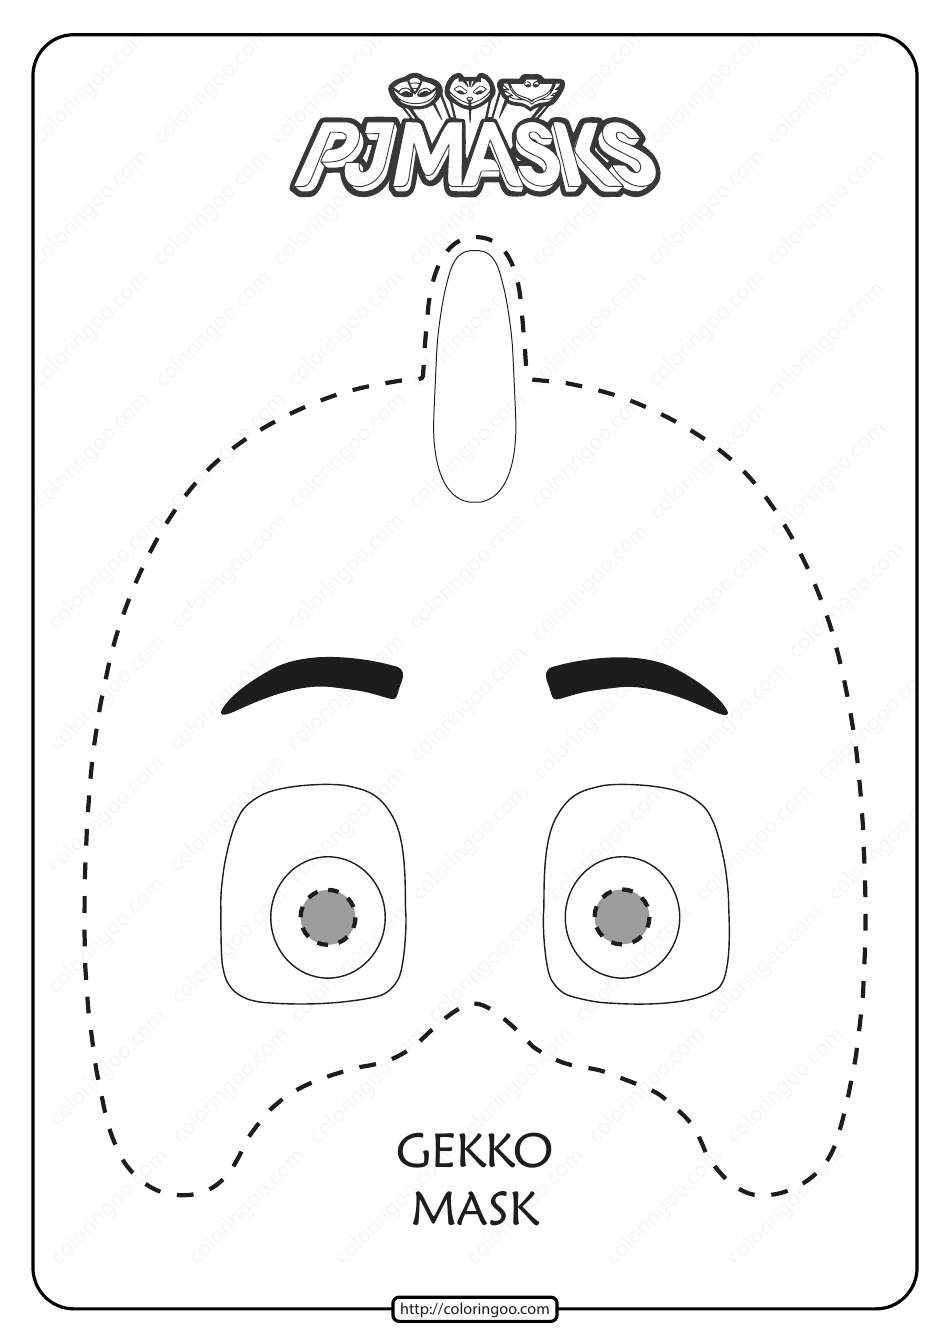 Gekko Mask Coloring Template, Page 1